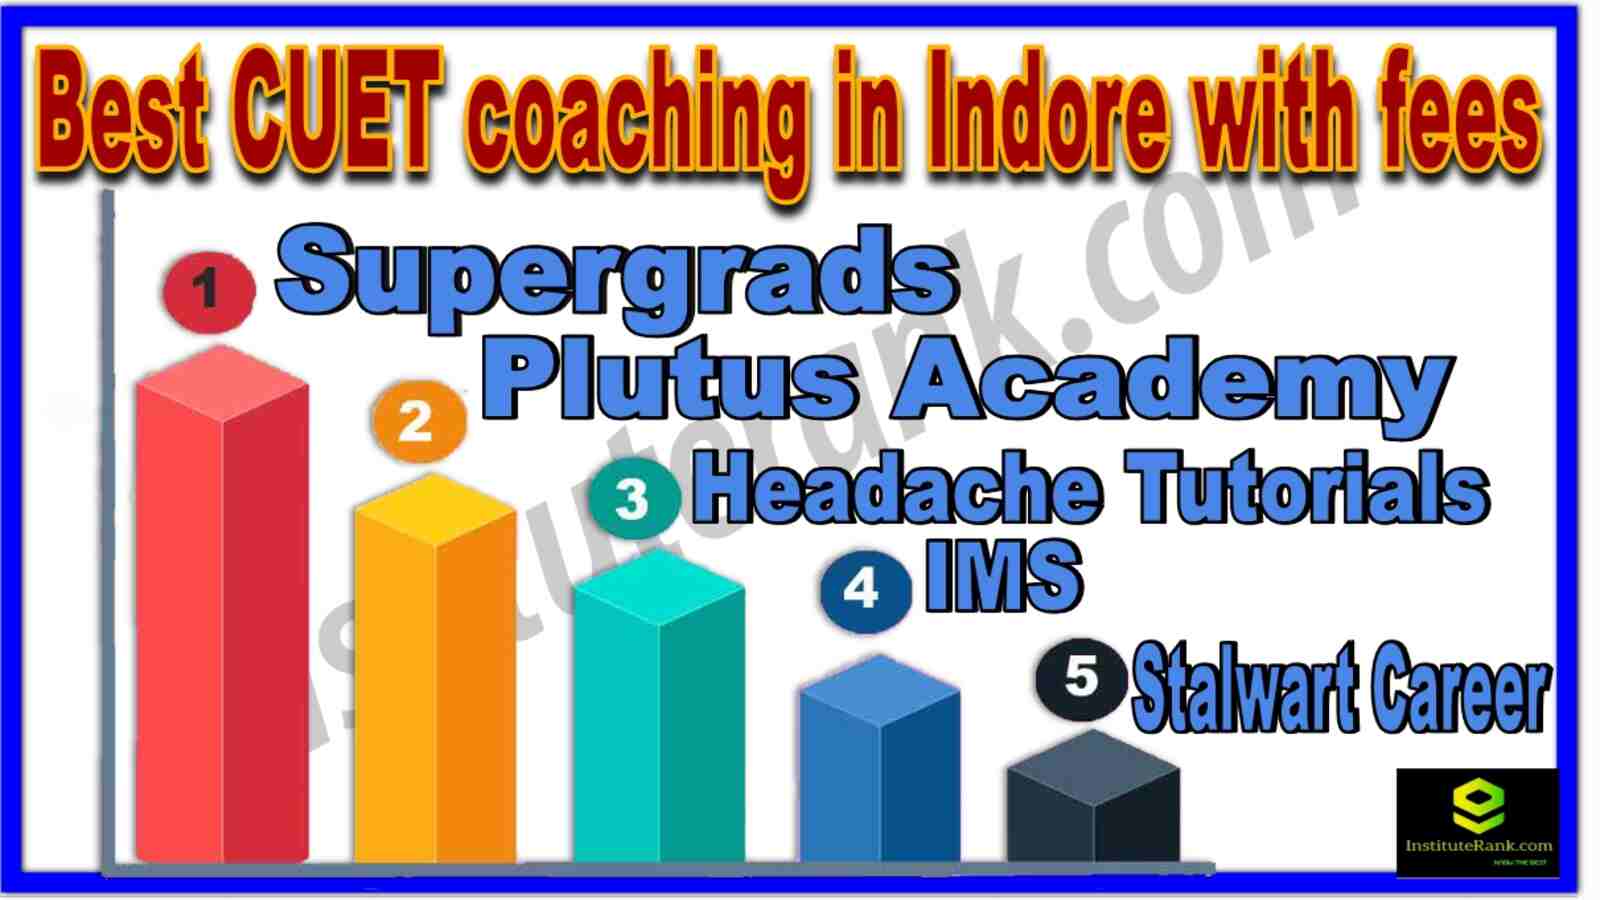 Top CUET Coaching in indore with fees